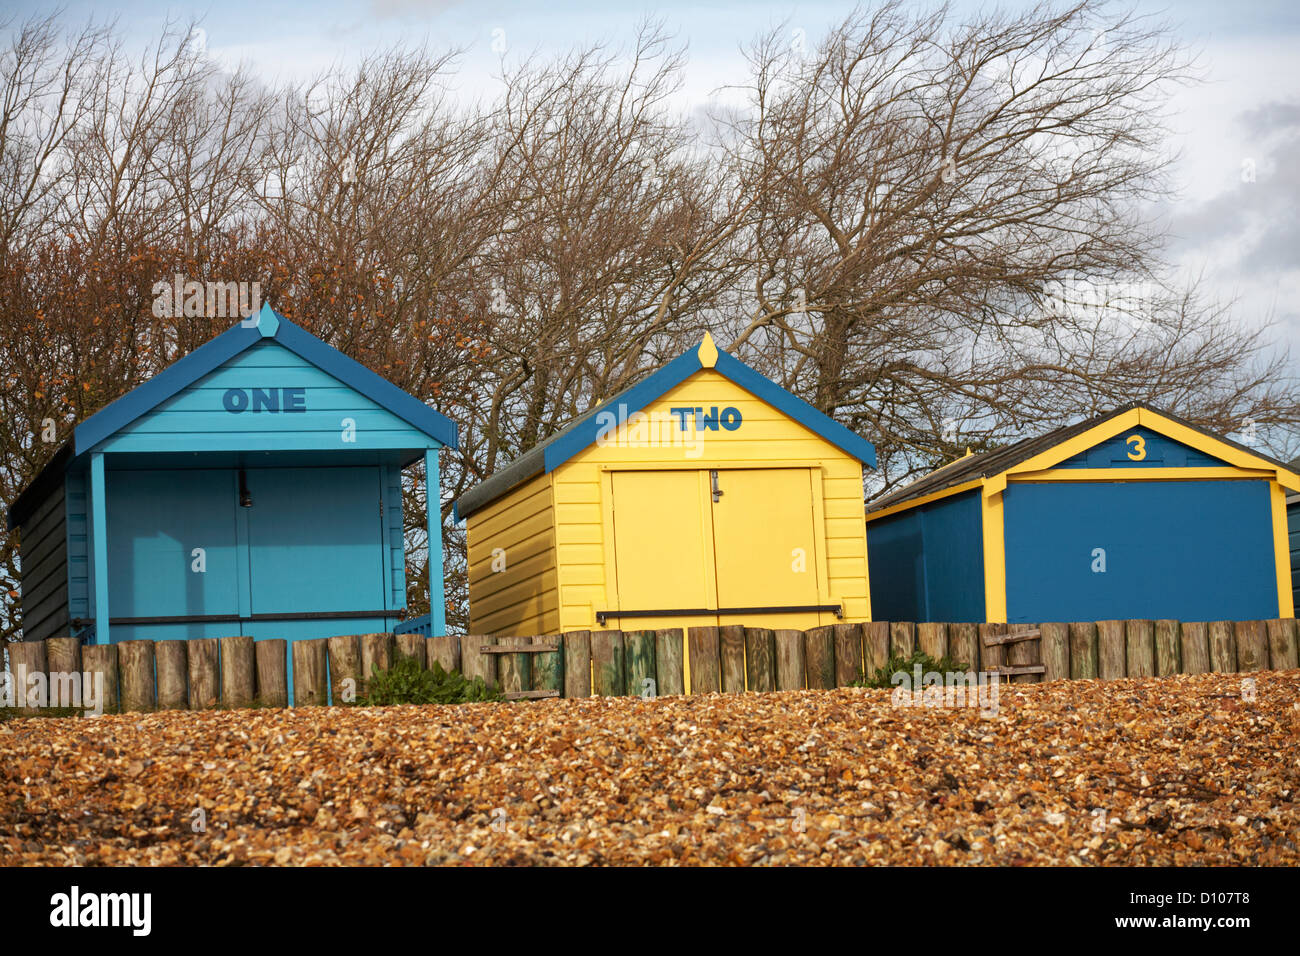 Beach huts One, Two, 3 at Calshot, Hampshire in November Stock Photo